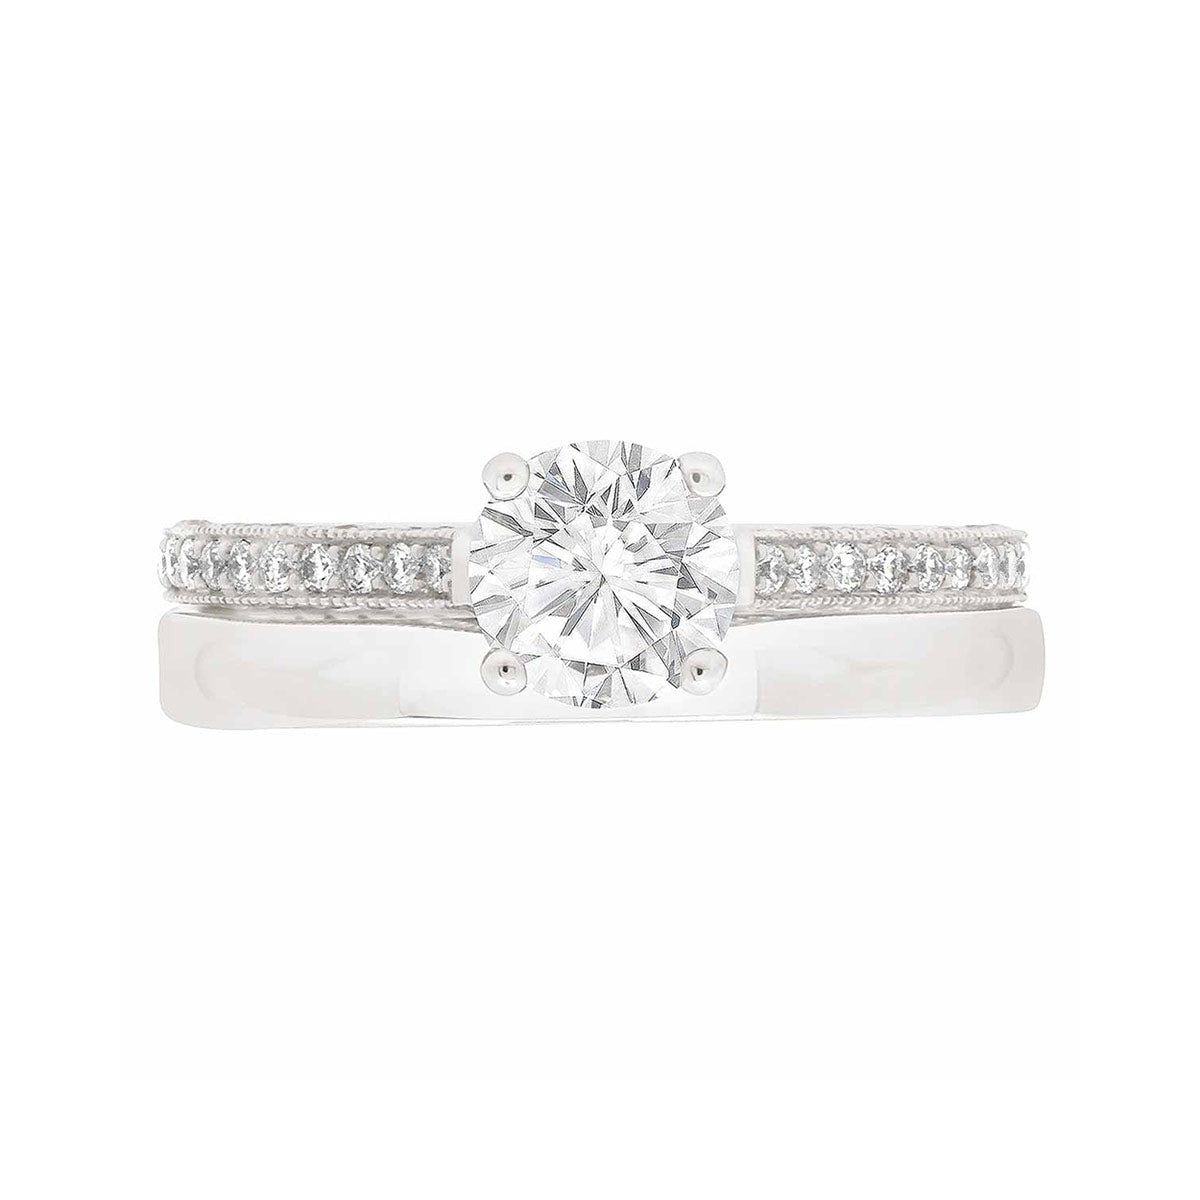 Thin Band Solitaire Ring with diamonds on sidewalls in white gold with plain wedding banc